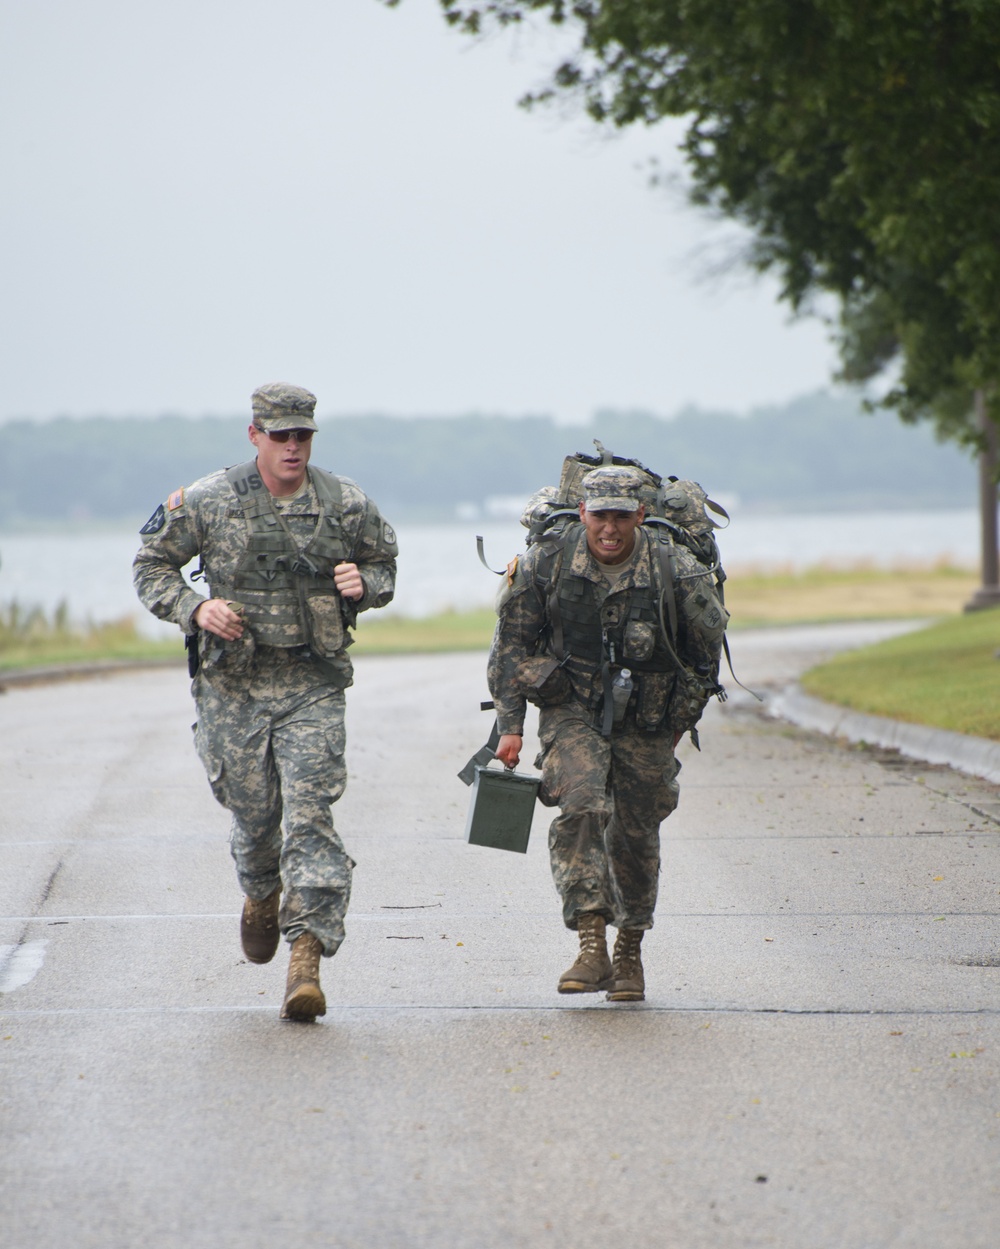 North Dakota’s top Soldiers compete to be named ‘Best Warrior’